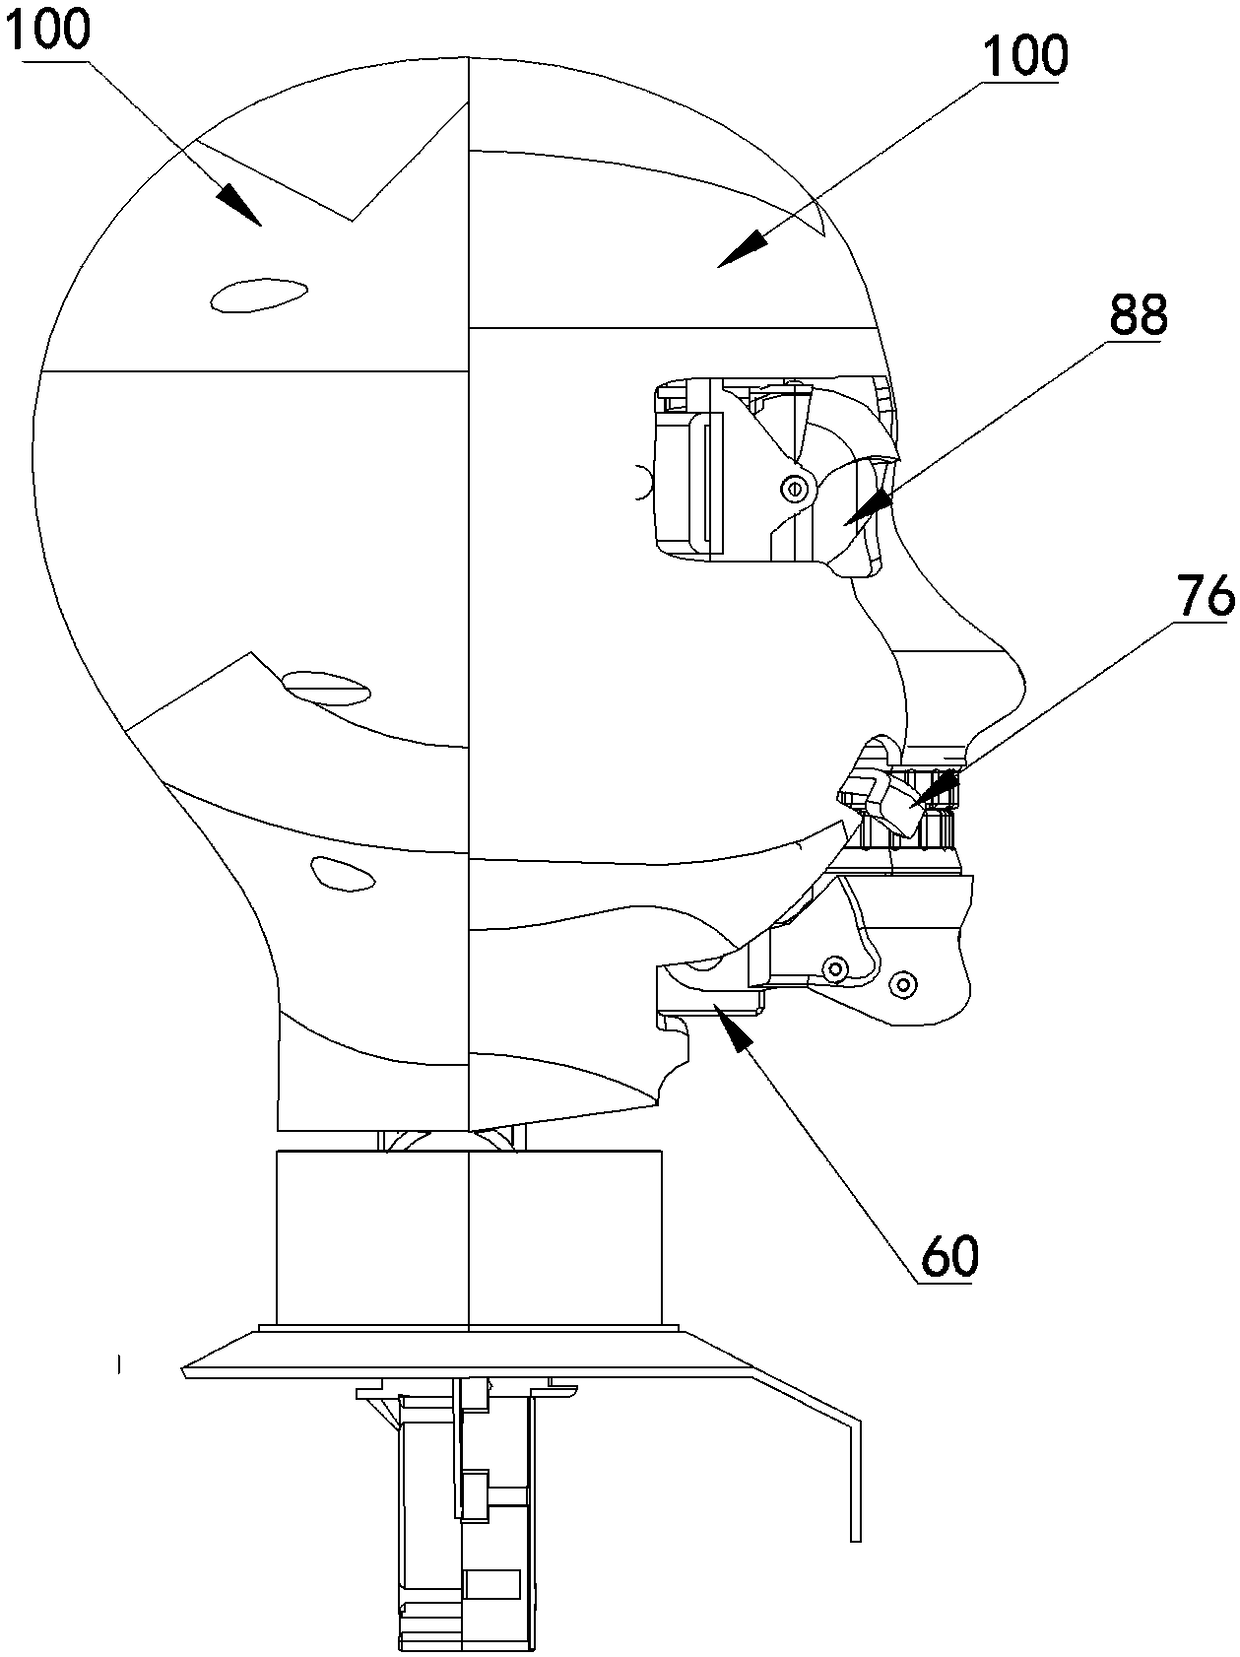 Robot head structure with tongue expression